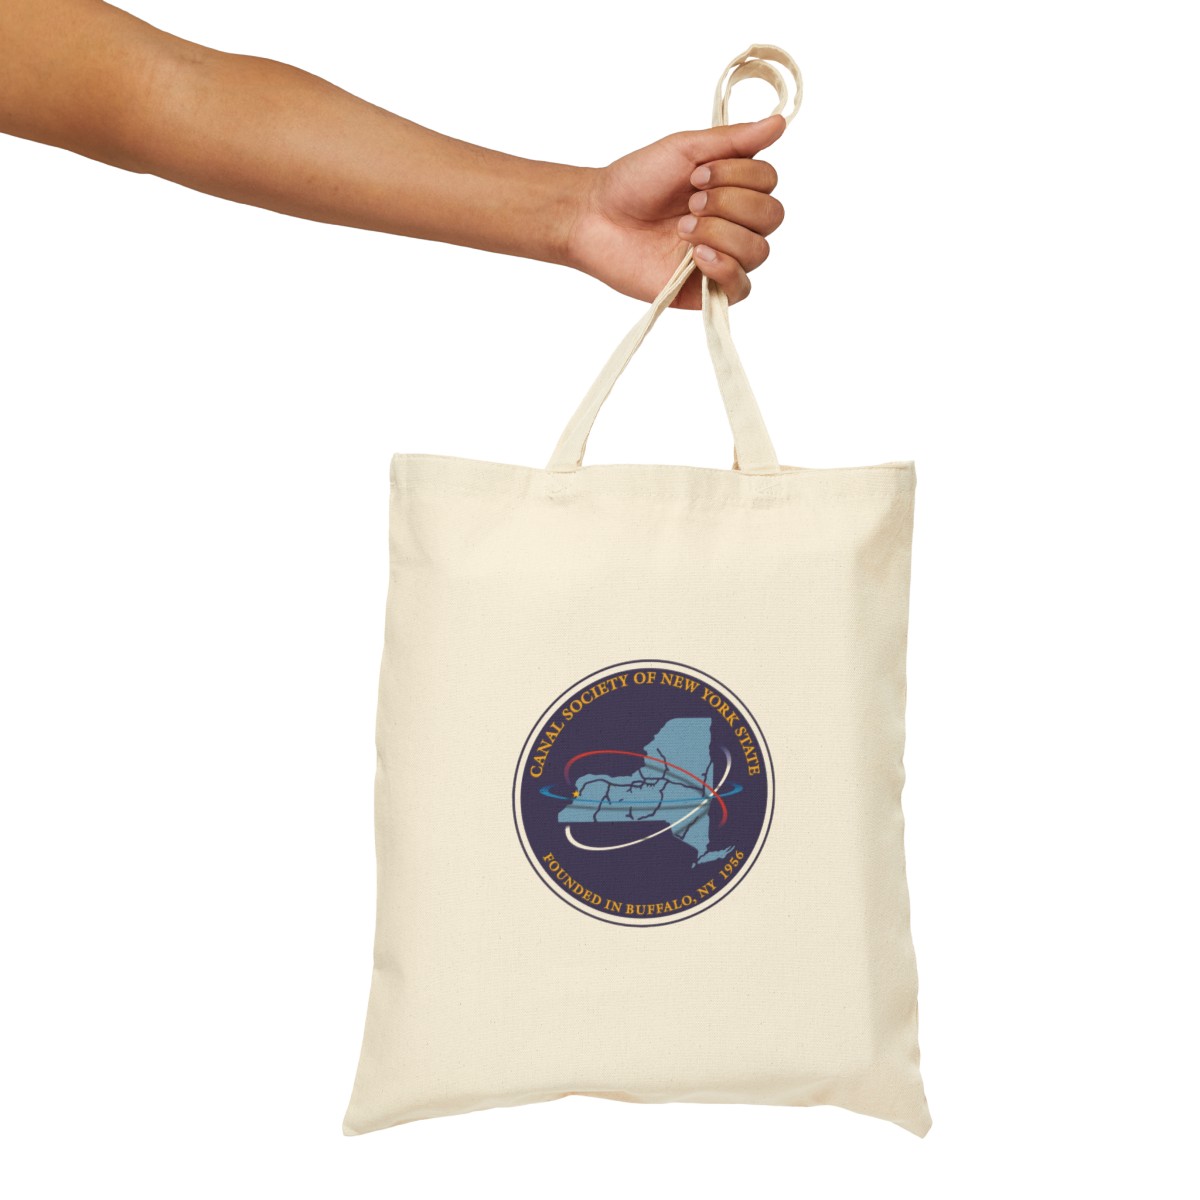 Canal Society Cotton Canvas Tote Bag product thumbnail image